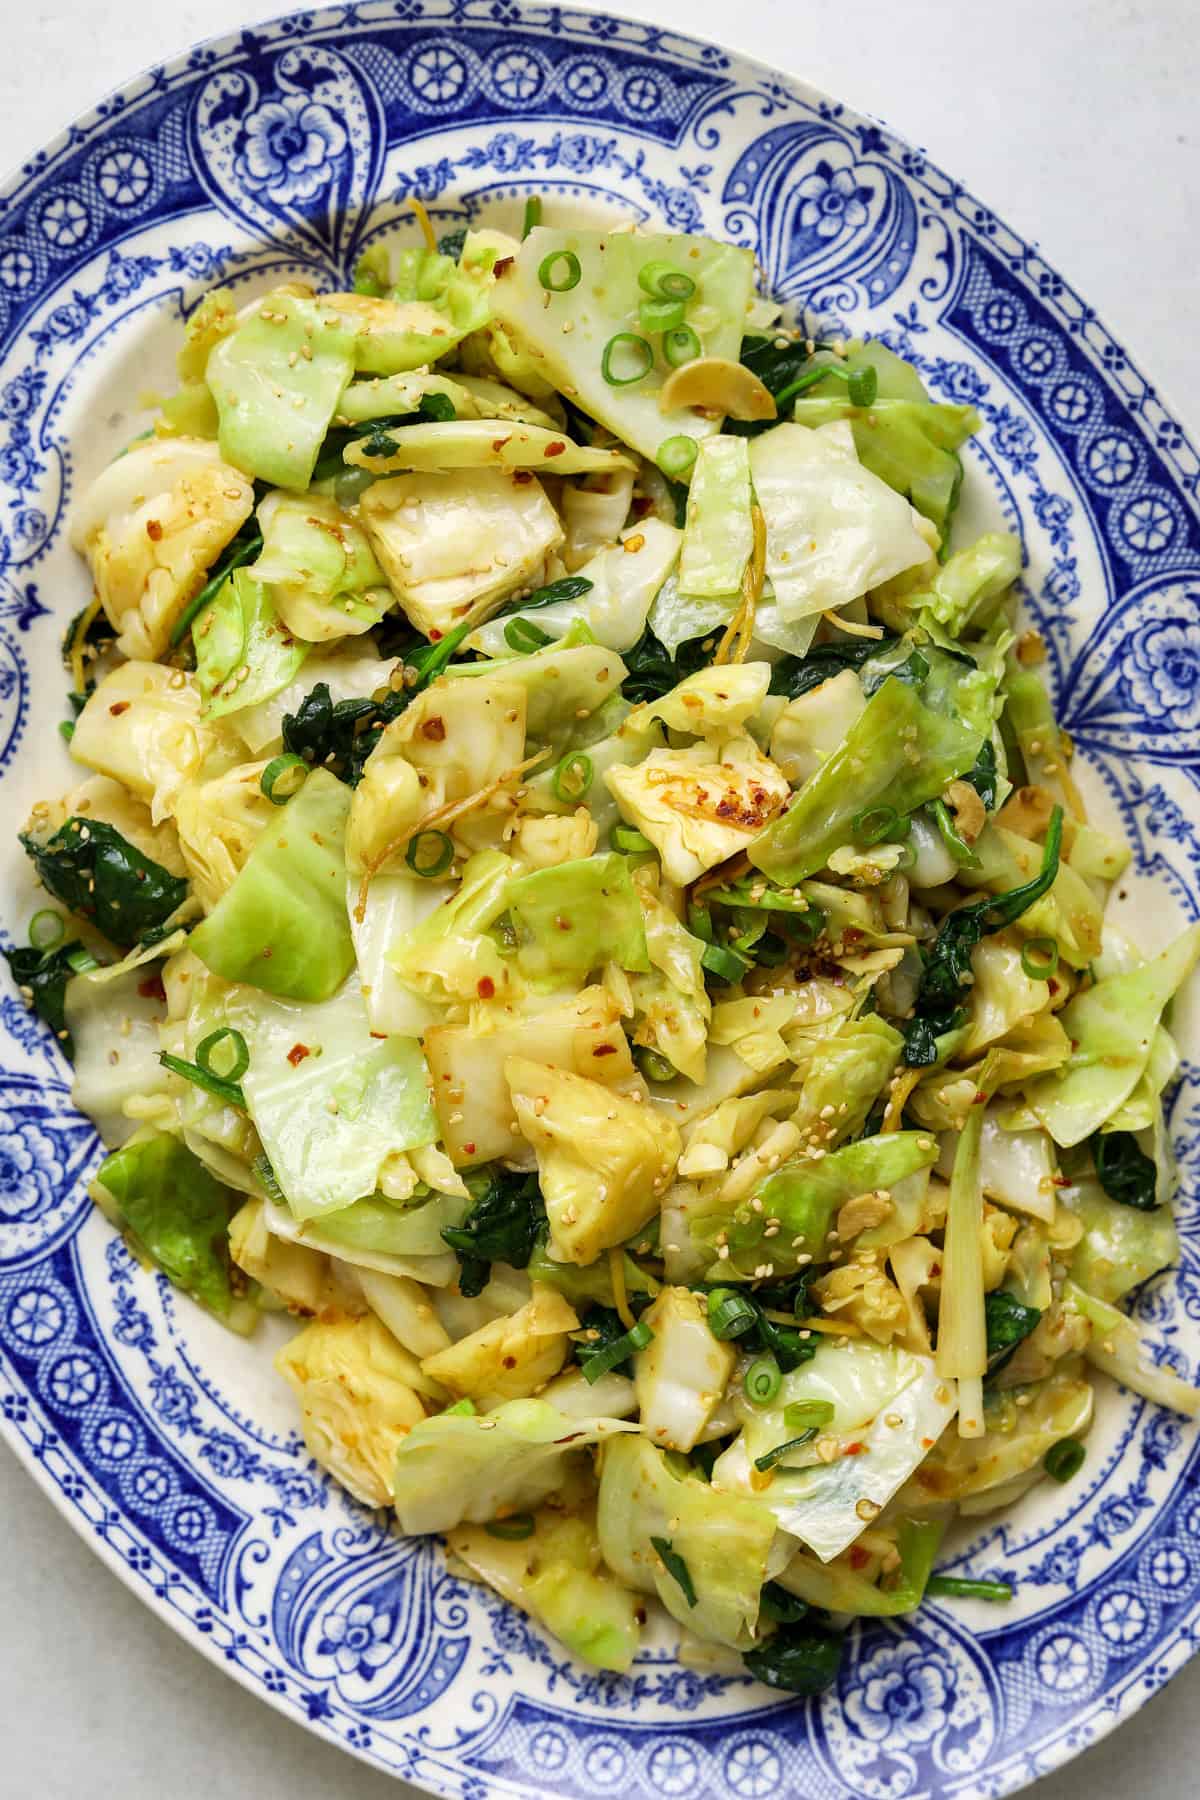 A close up image of pale green and light yellow cooked cabbage with ginger, green onion and sesame seeds on a blue and white platter.